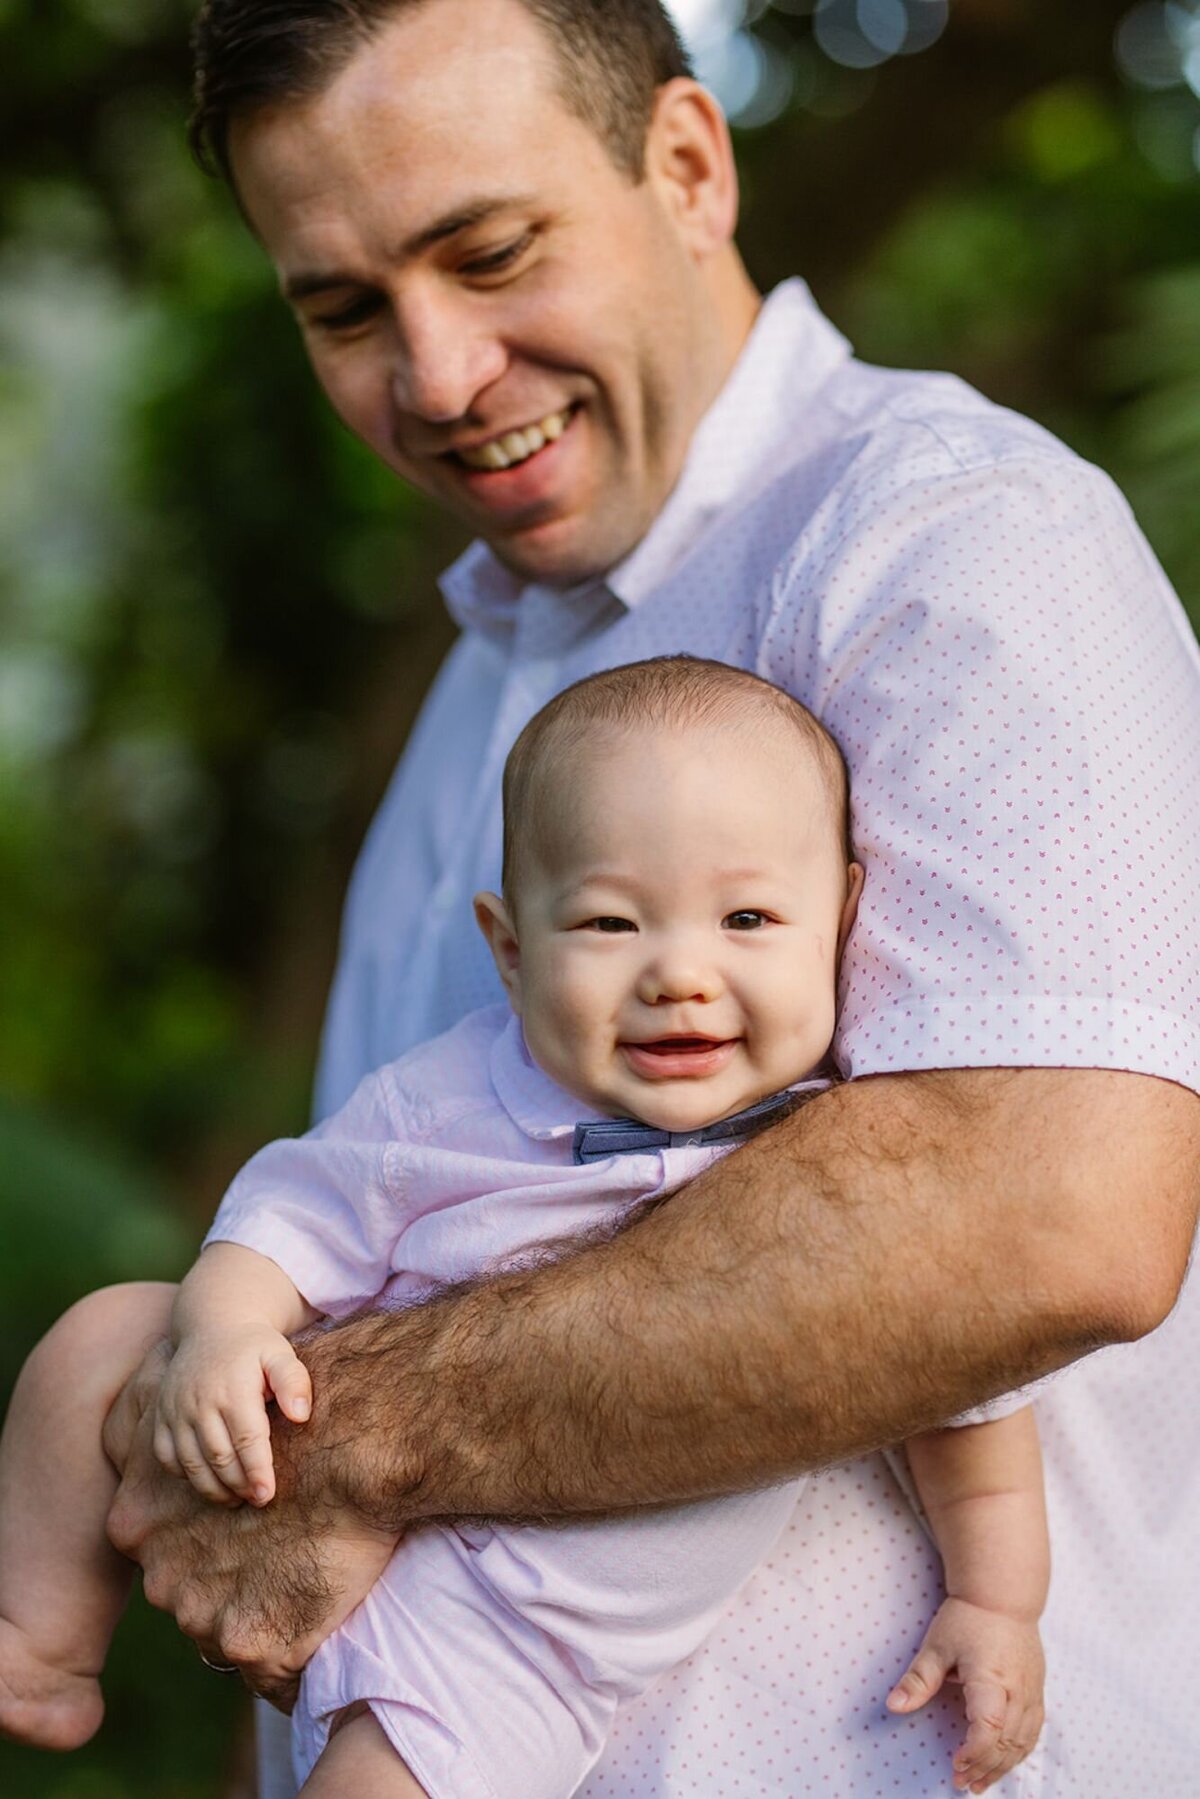 dad holds a laughing baby on his forearm